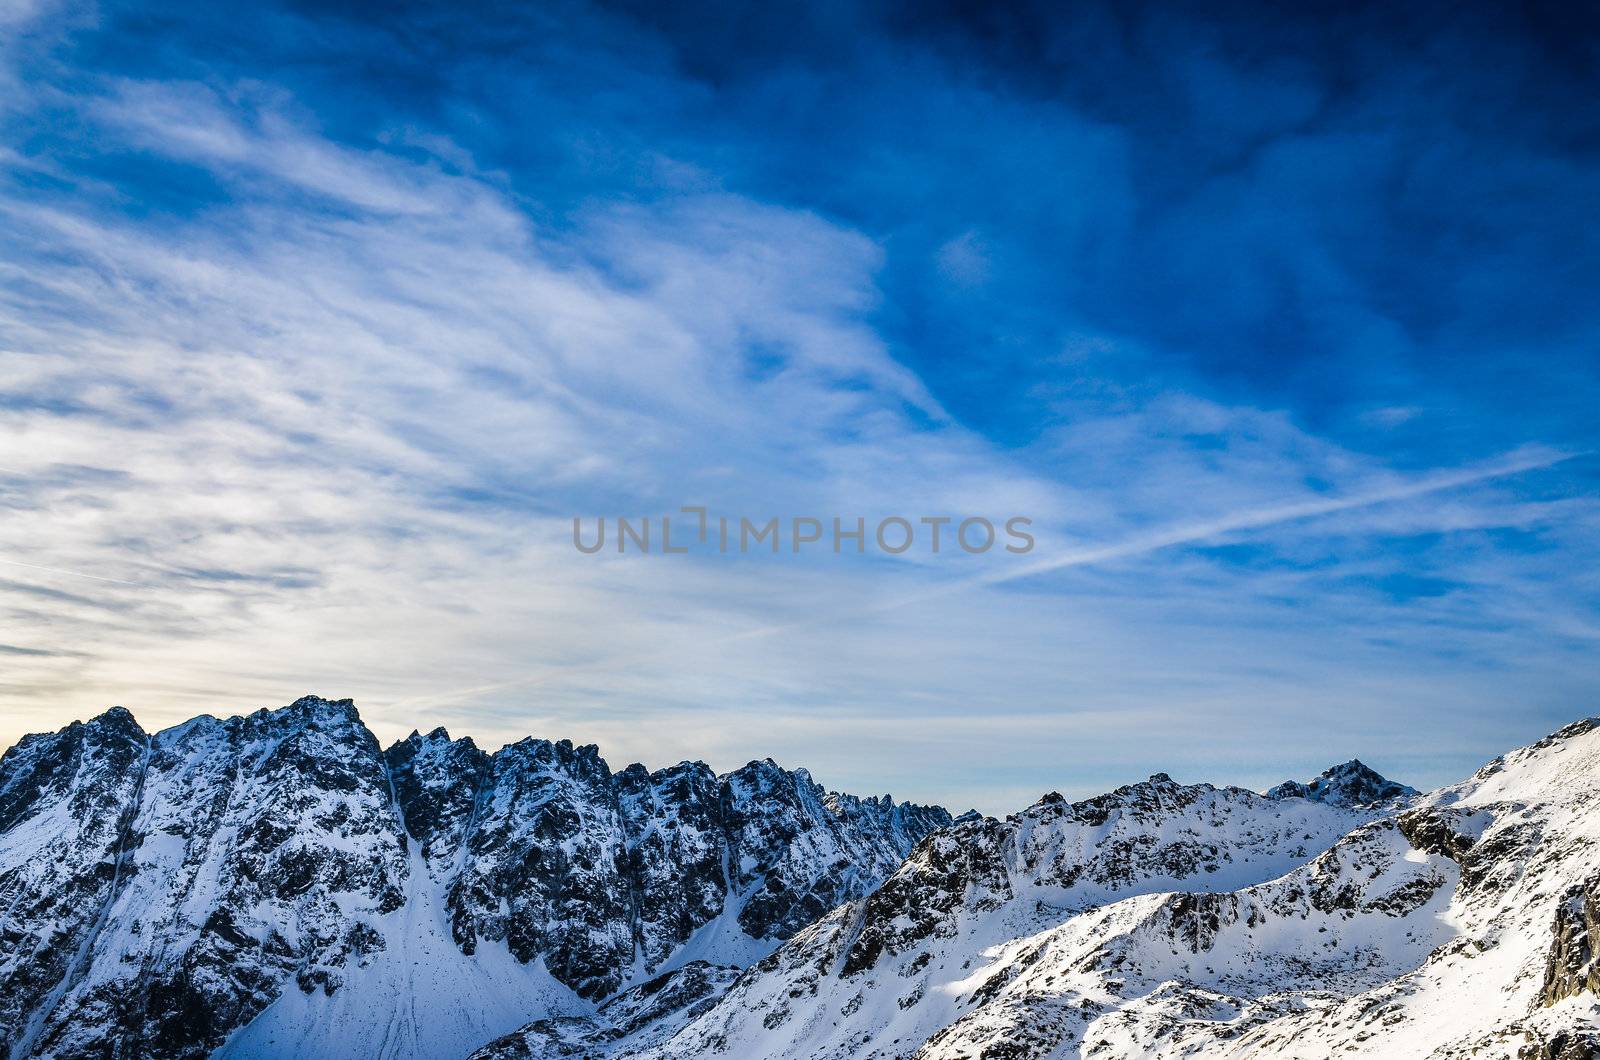 Winter High Tatras mountains landscape with blue cloudy sky by martinm303